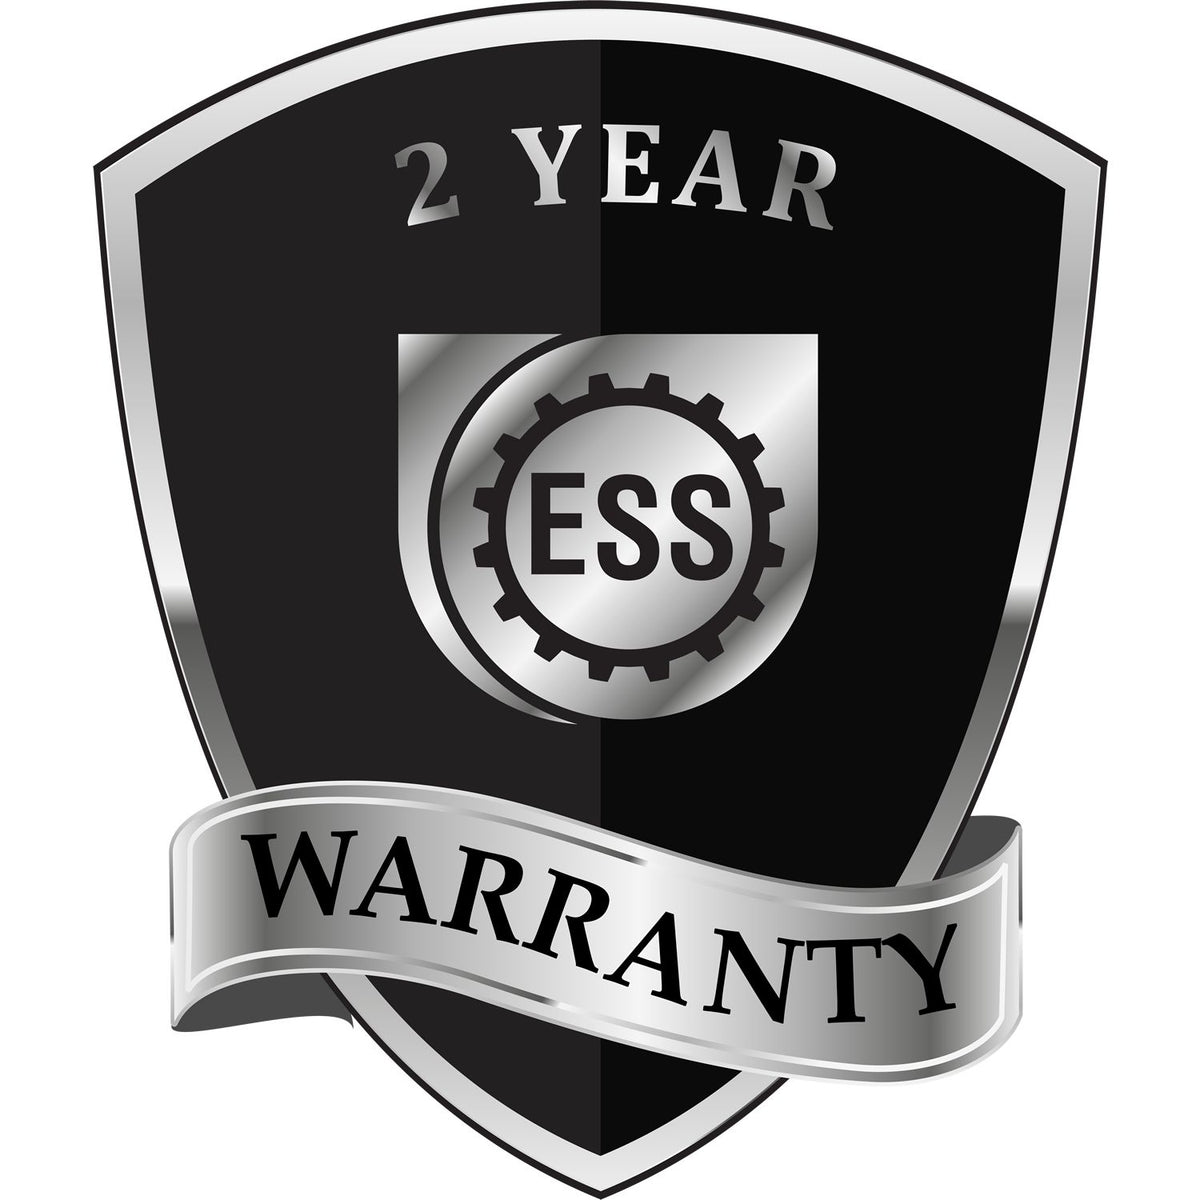 A black and silver badge or emblem showing warranty information for the Hybrid Louisiana Landscape Architect Seal